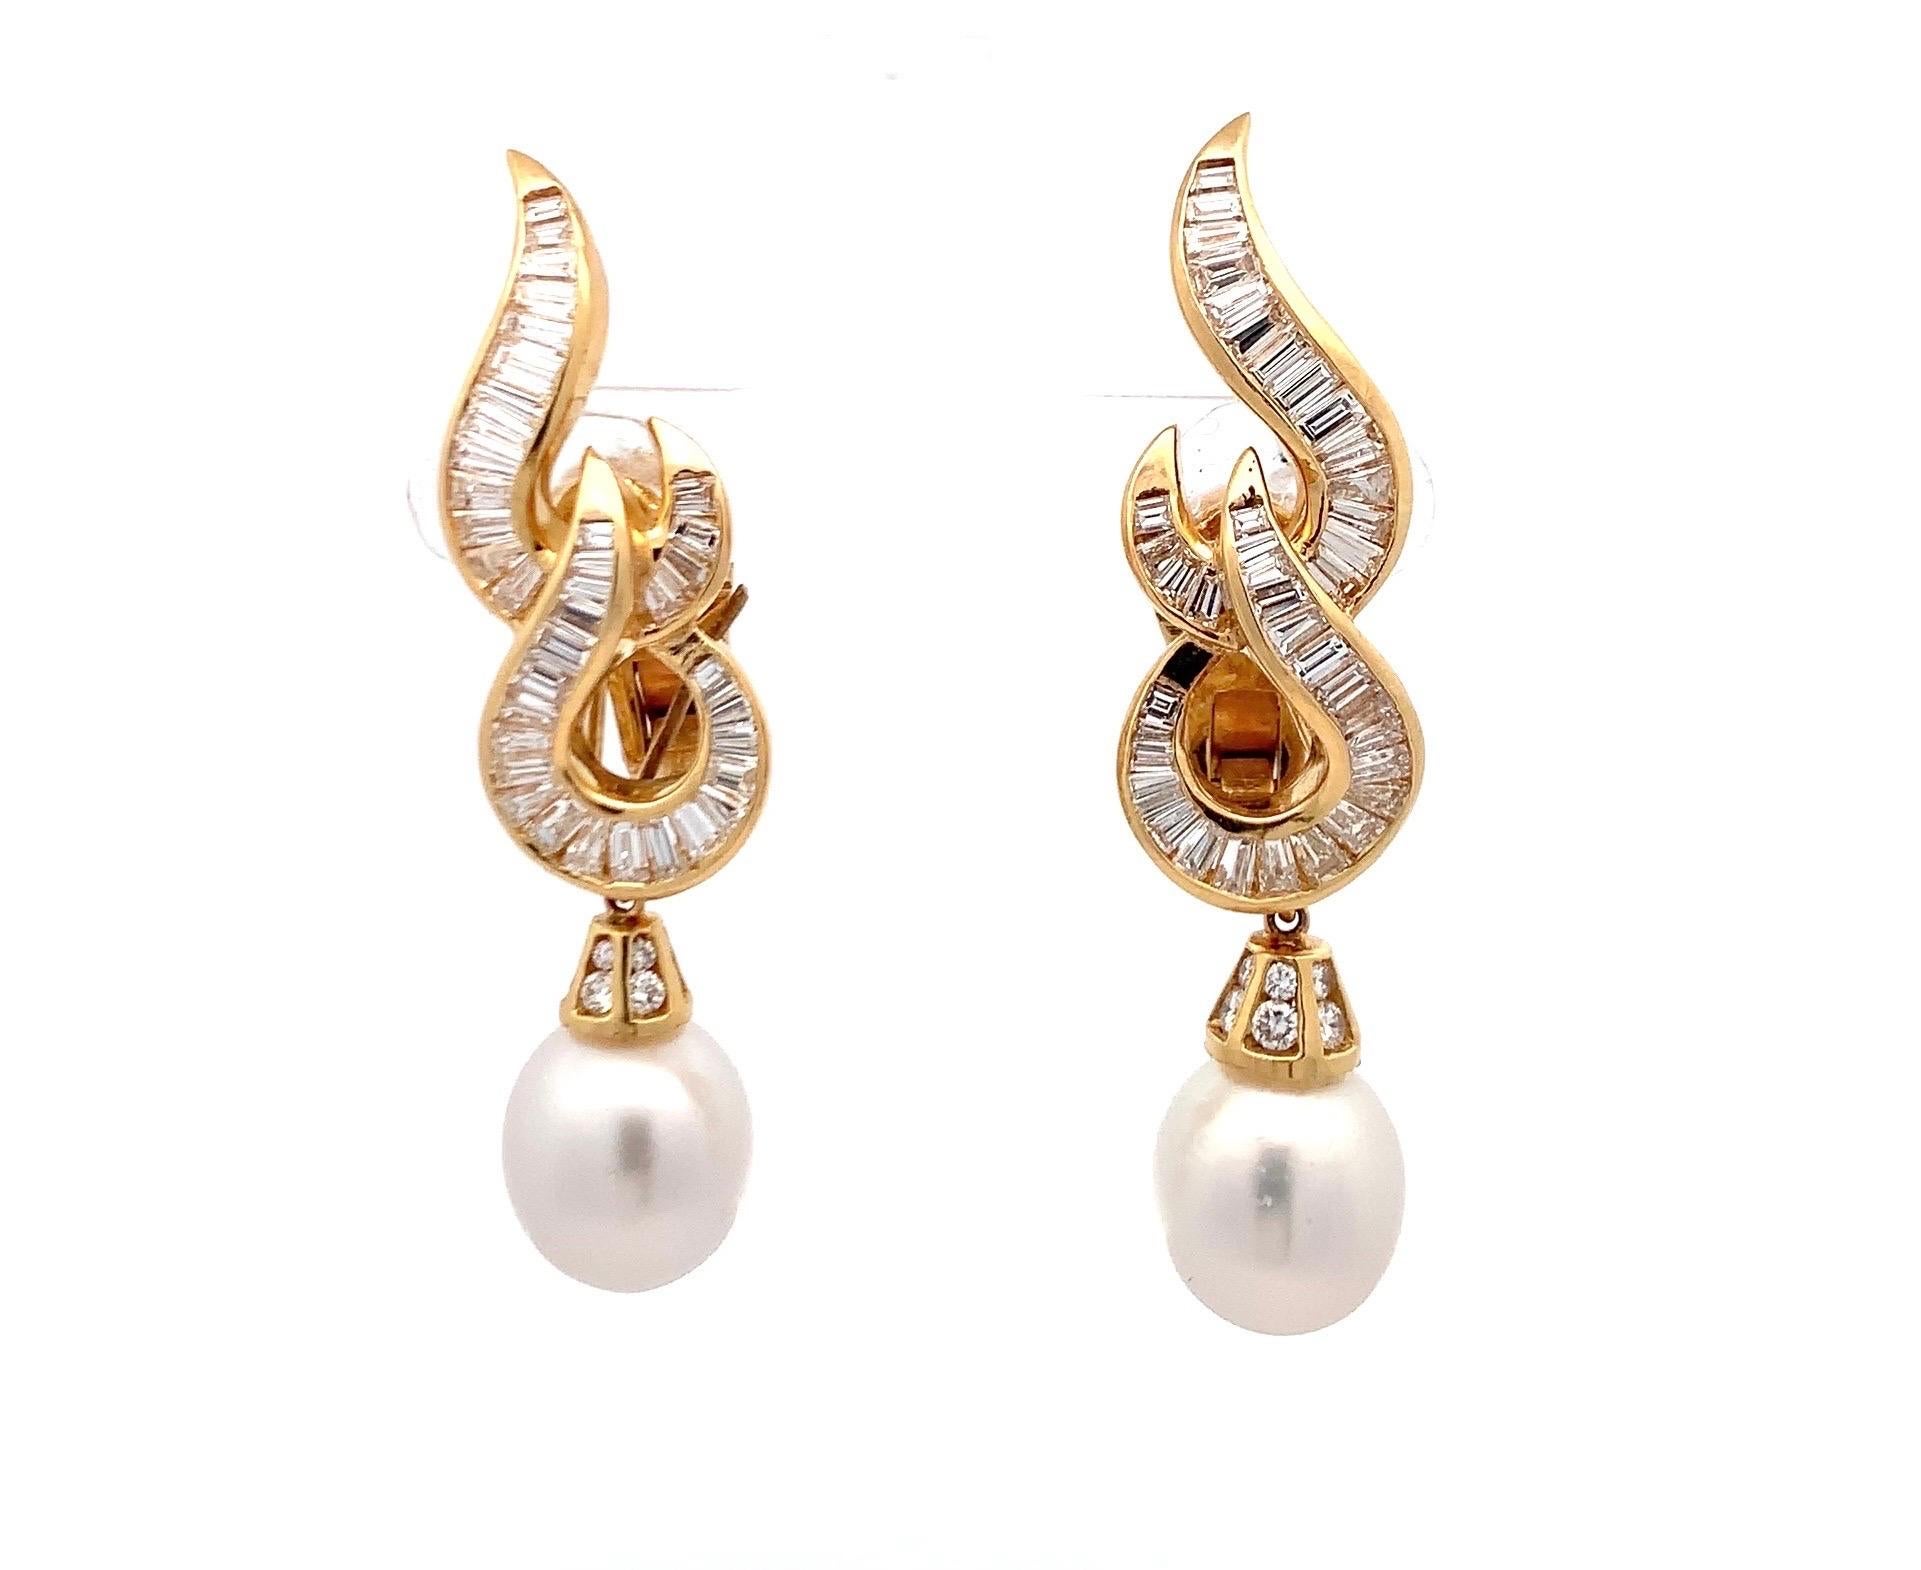 Pearl and Diamond Day and Night Earrings

A pair of yellow gold day and night earrings set with 72 baguette cut diamonds. The earrings come with 2 South Sea pearl attachments allowing the earrings to be worn in 2 ways.

Approximate Diamond Weight: